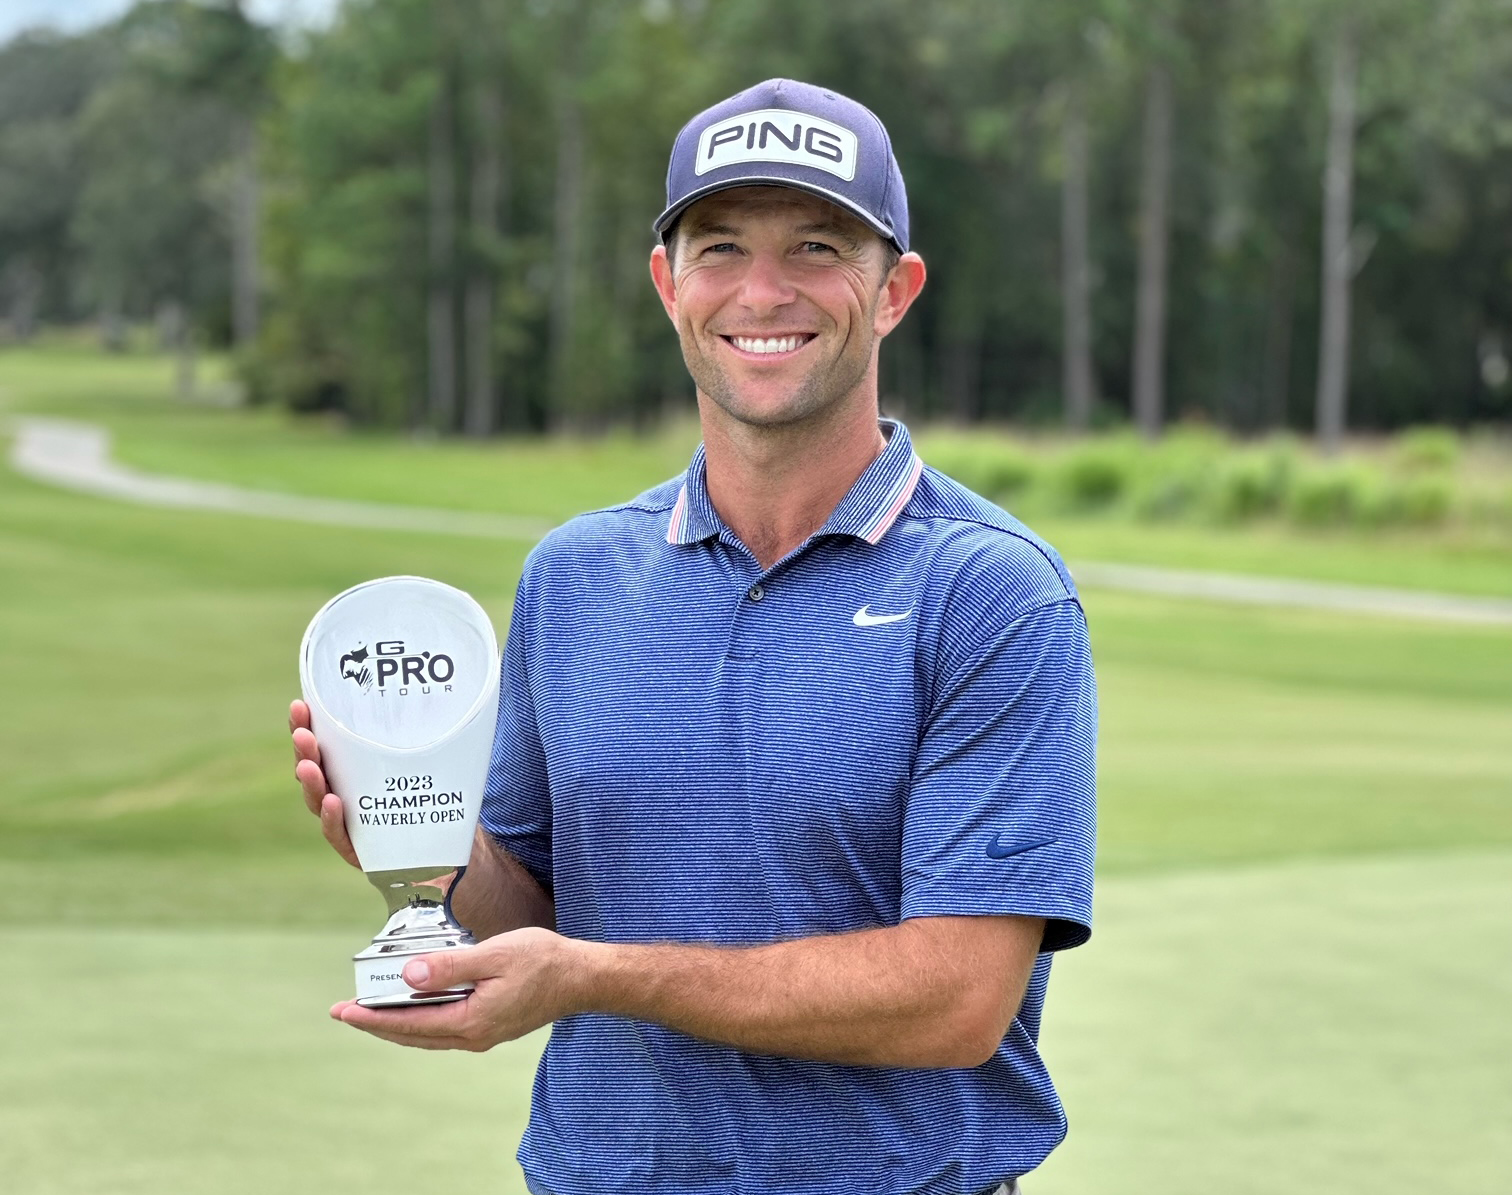 Sizzling final round carries Quincy native Luke Guthrie to championship ...